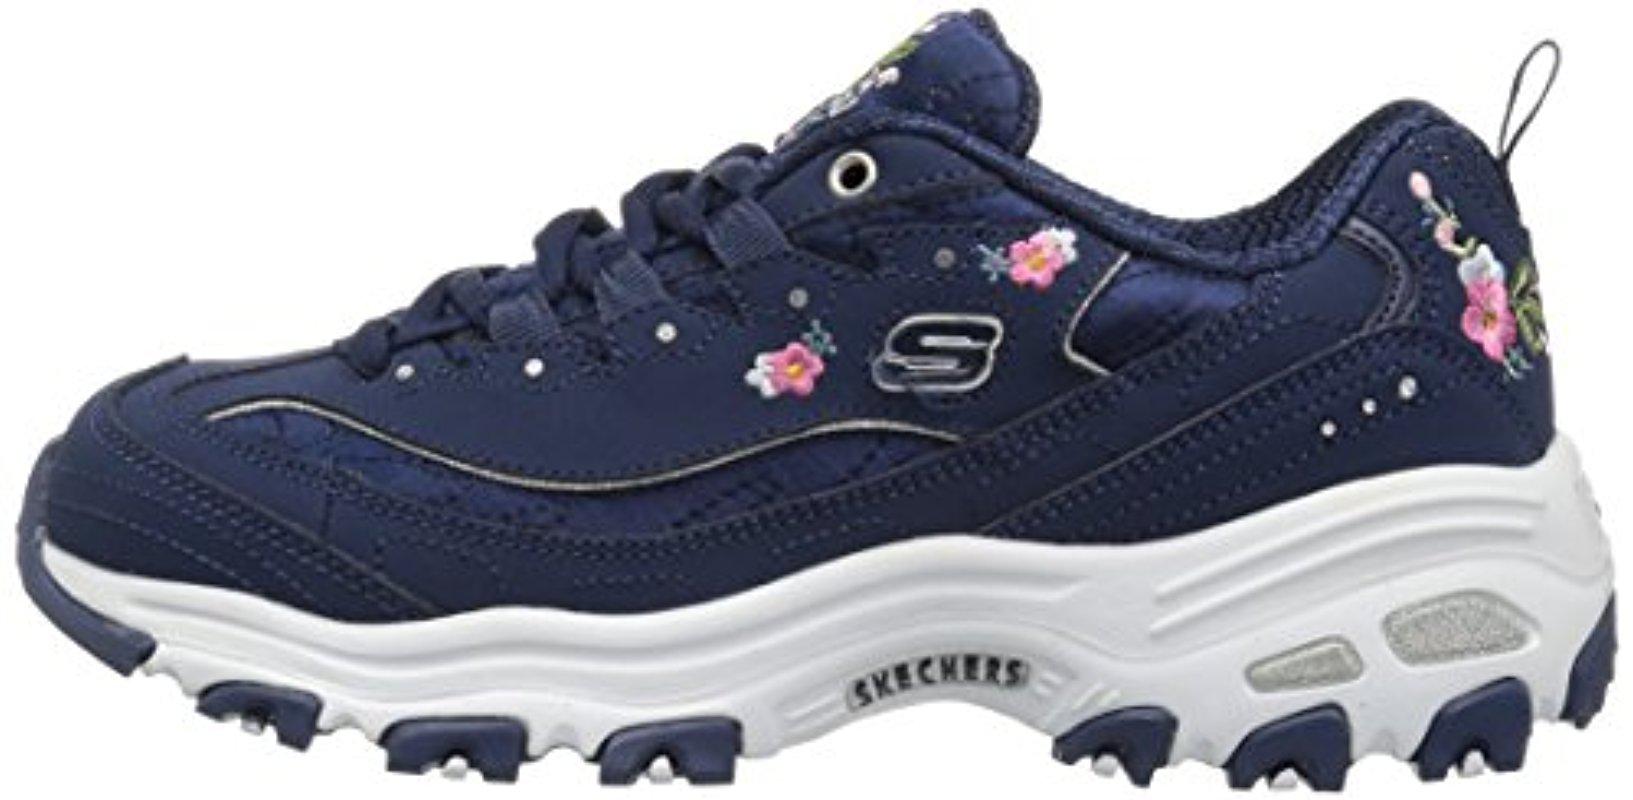 Skechers Rubber D'lites Bright Blossoms Sneaker,navy,5 M Us in Blue - Lyst